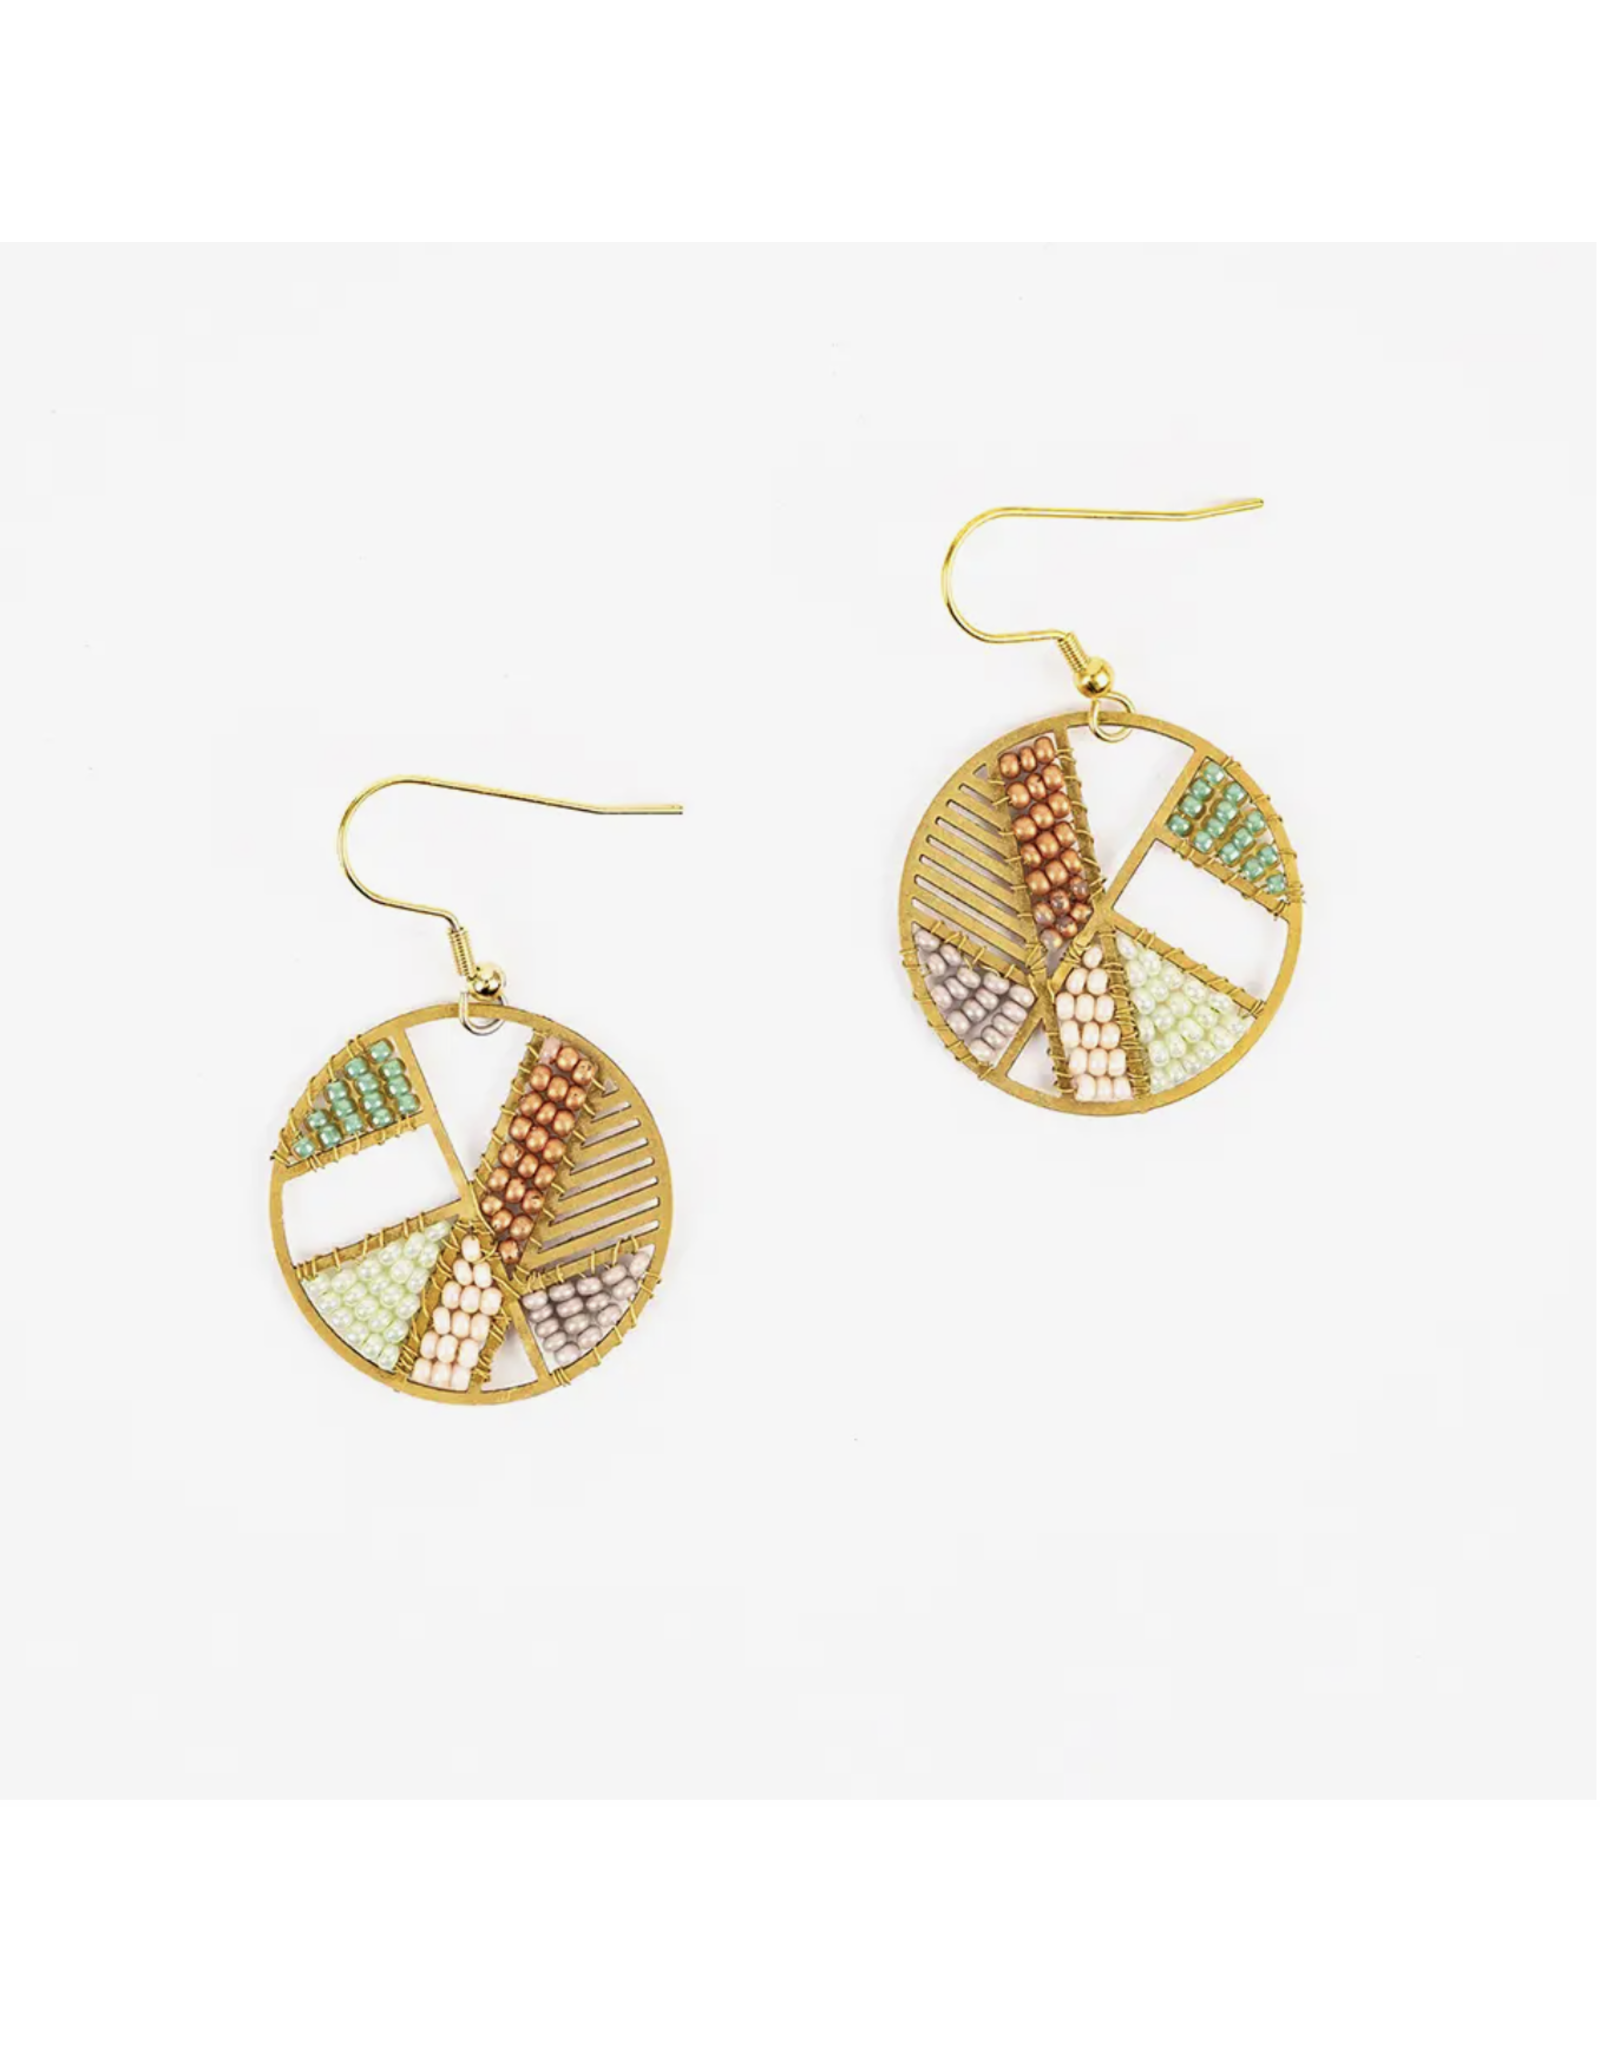 Trade roots Patchwork Disc Earrings, Seafoam Sand, Guatemala